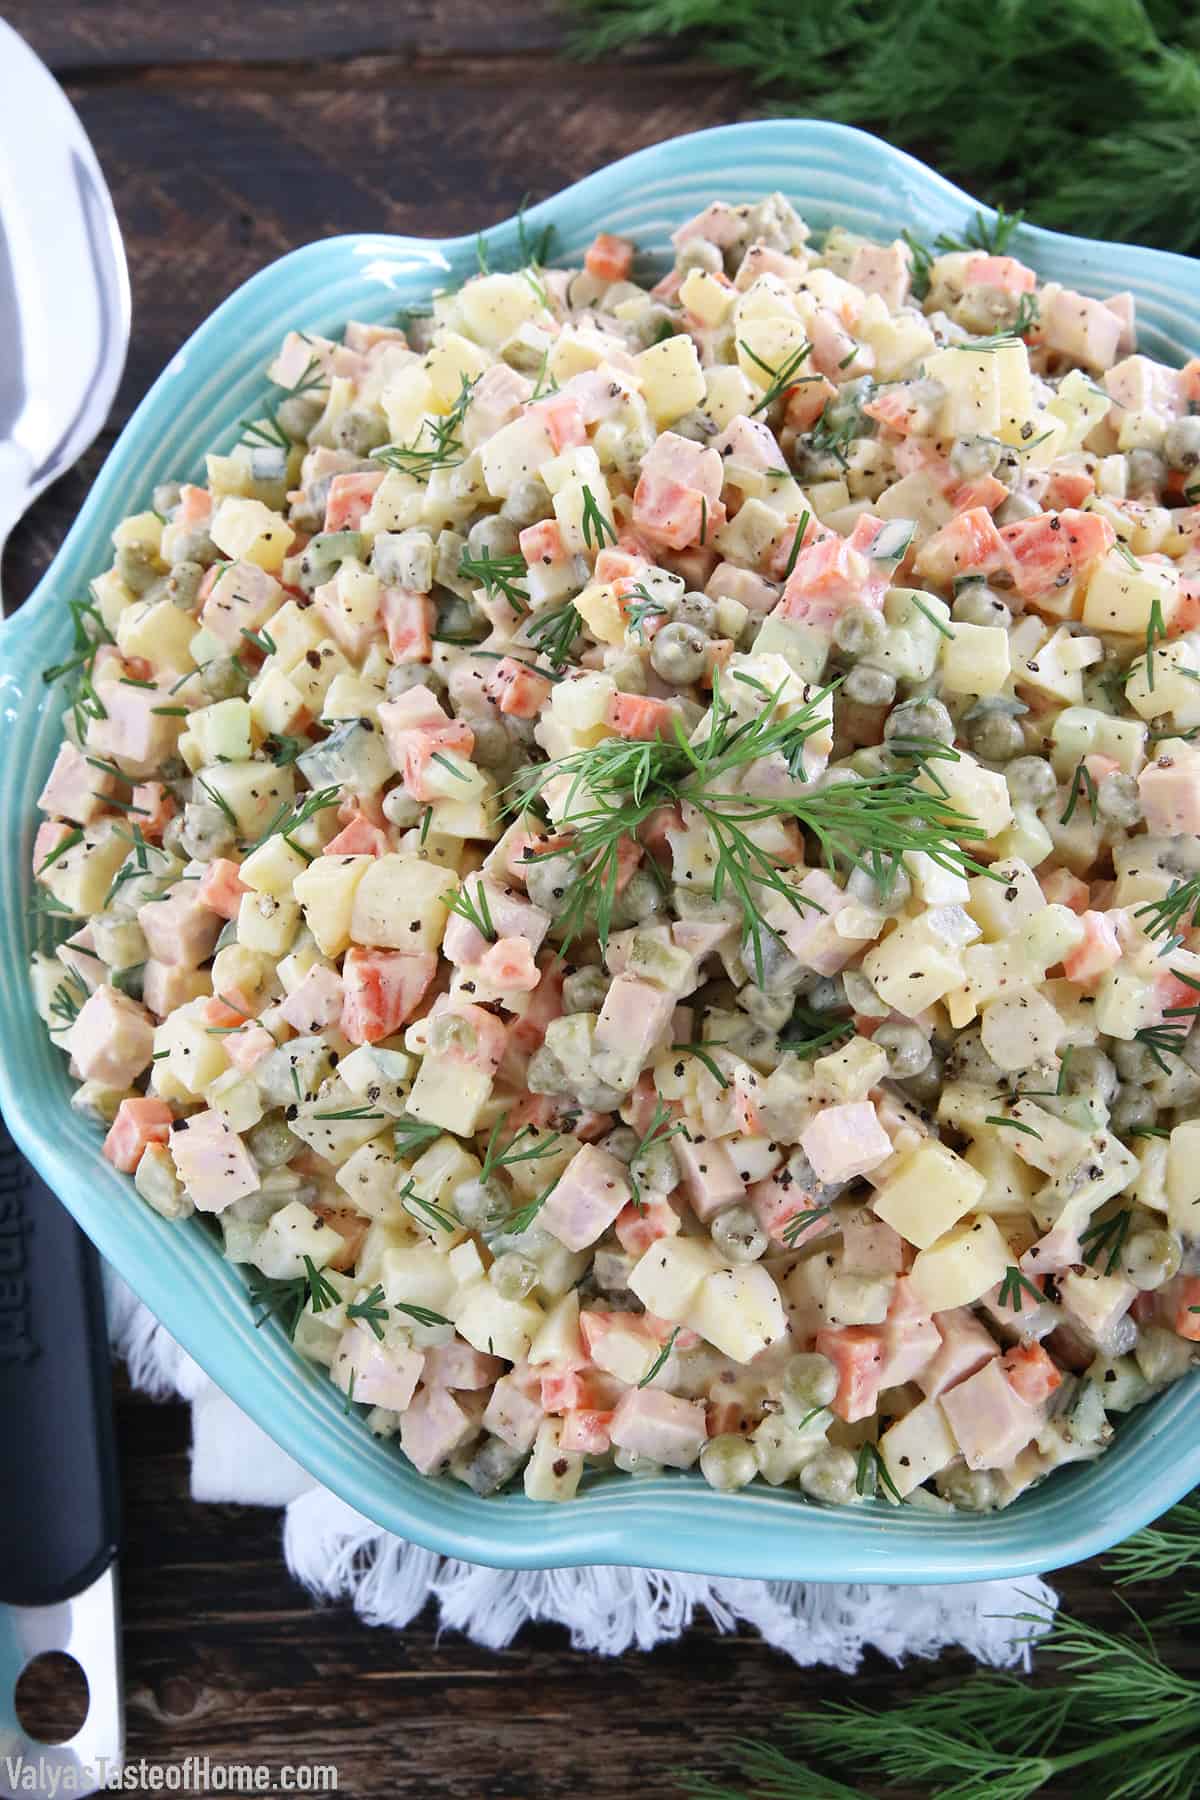 This recipe is a definite crowd-pleaser, and kids and adults seem to love it alike. It’s the perfect side dish for a BBQ cookout, or to have on your dinner table.